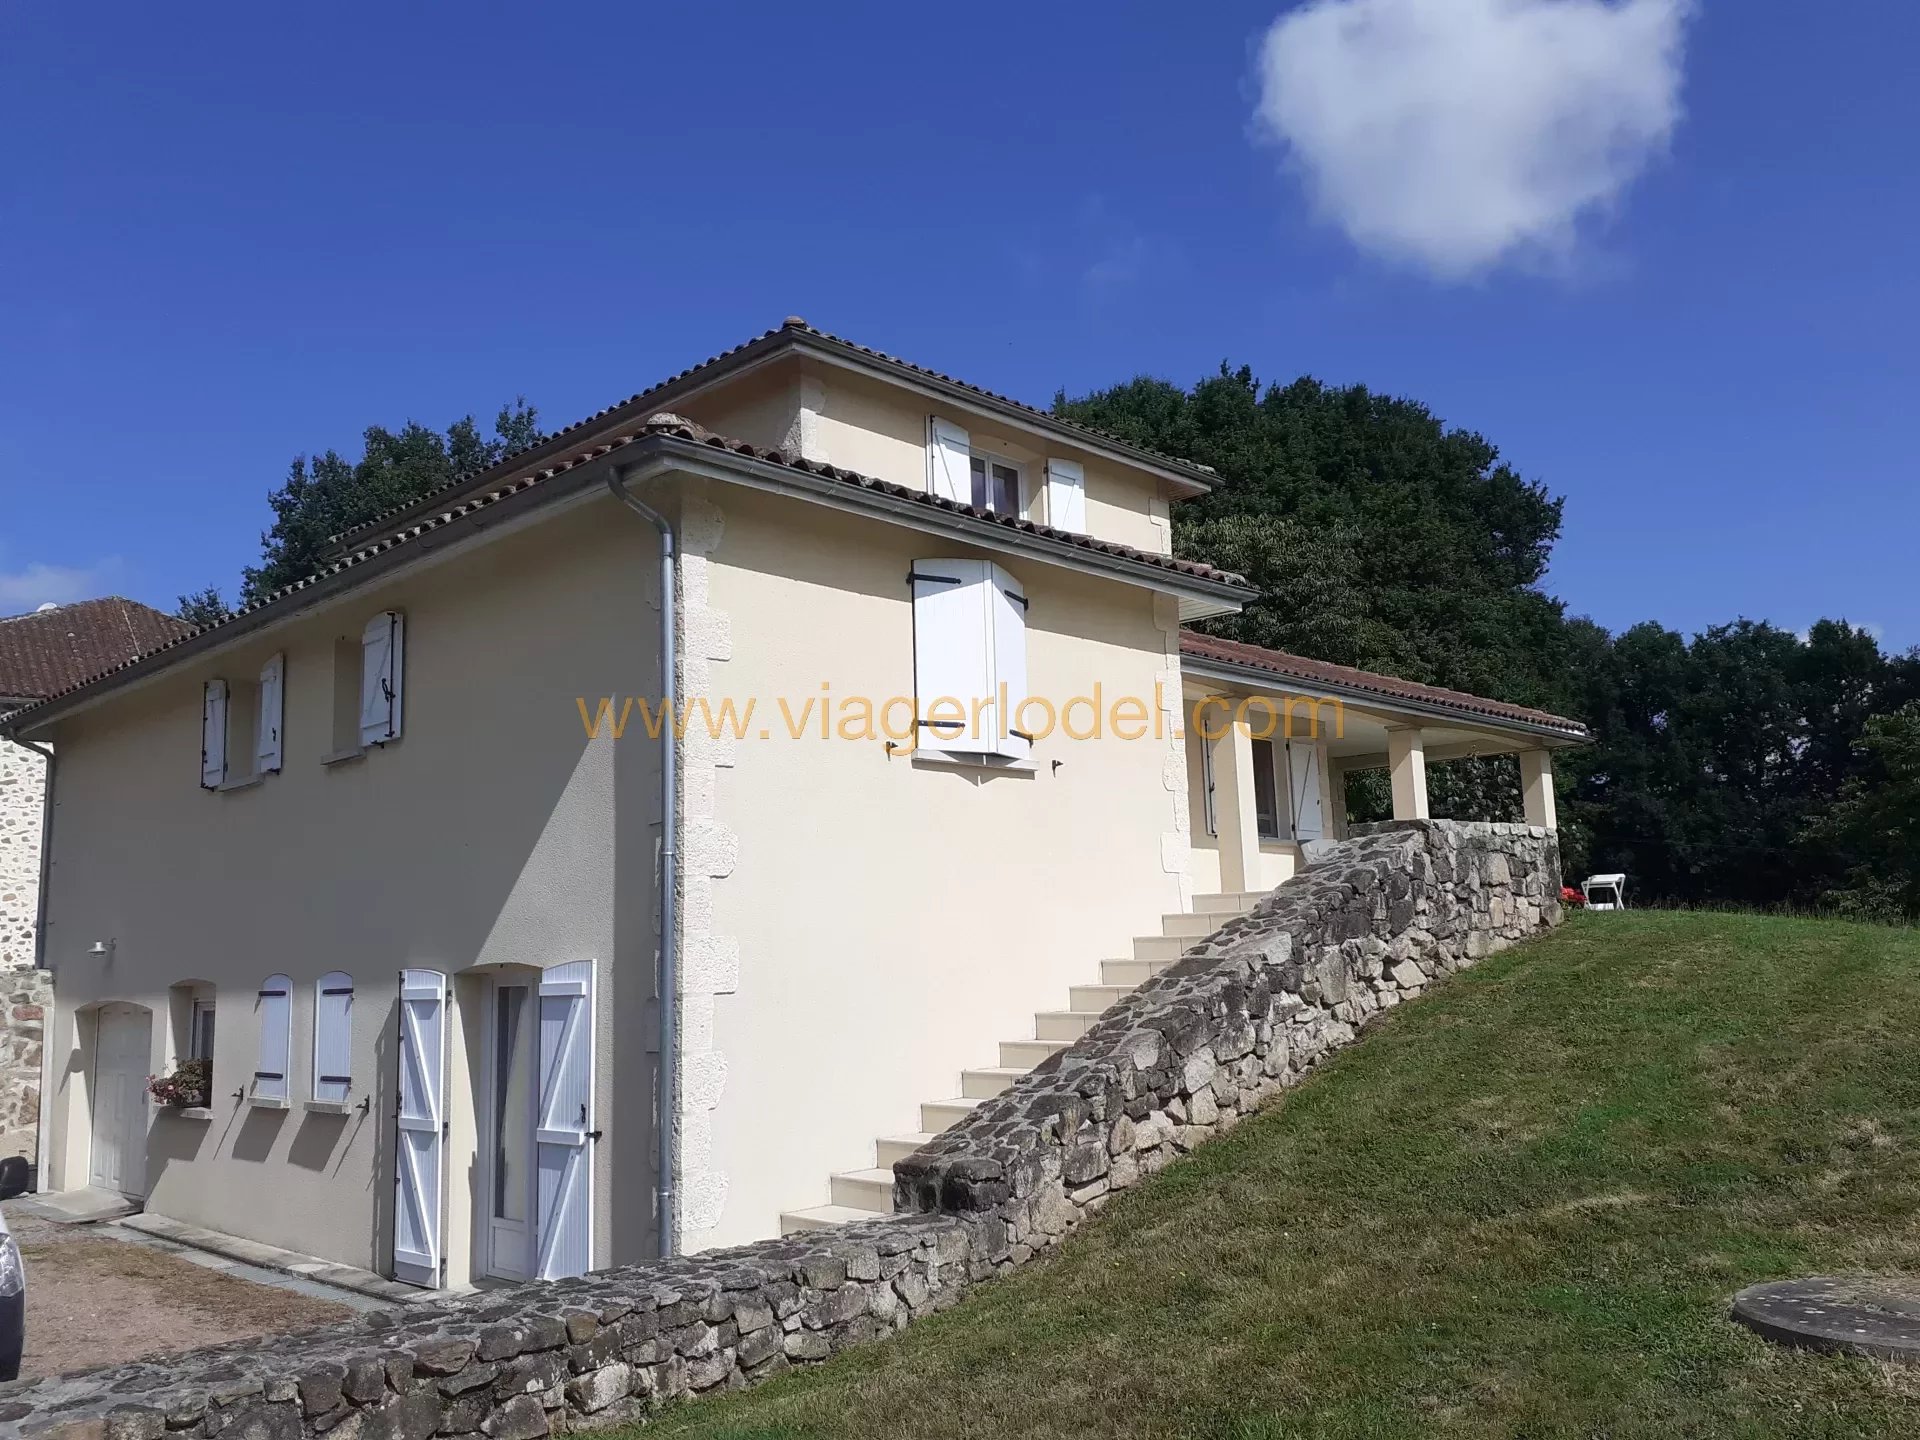 Ref.: 9195 - LIFE ANNUITY - SAINT MATHIEU (85) - Occupied and rented houses